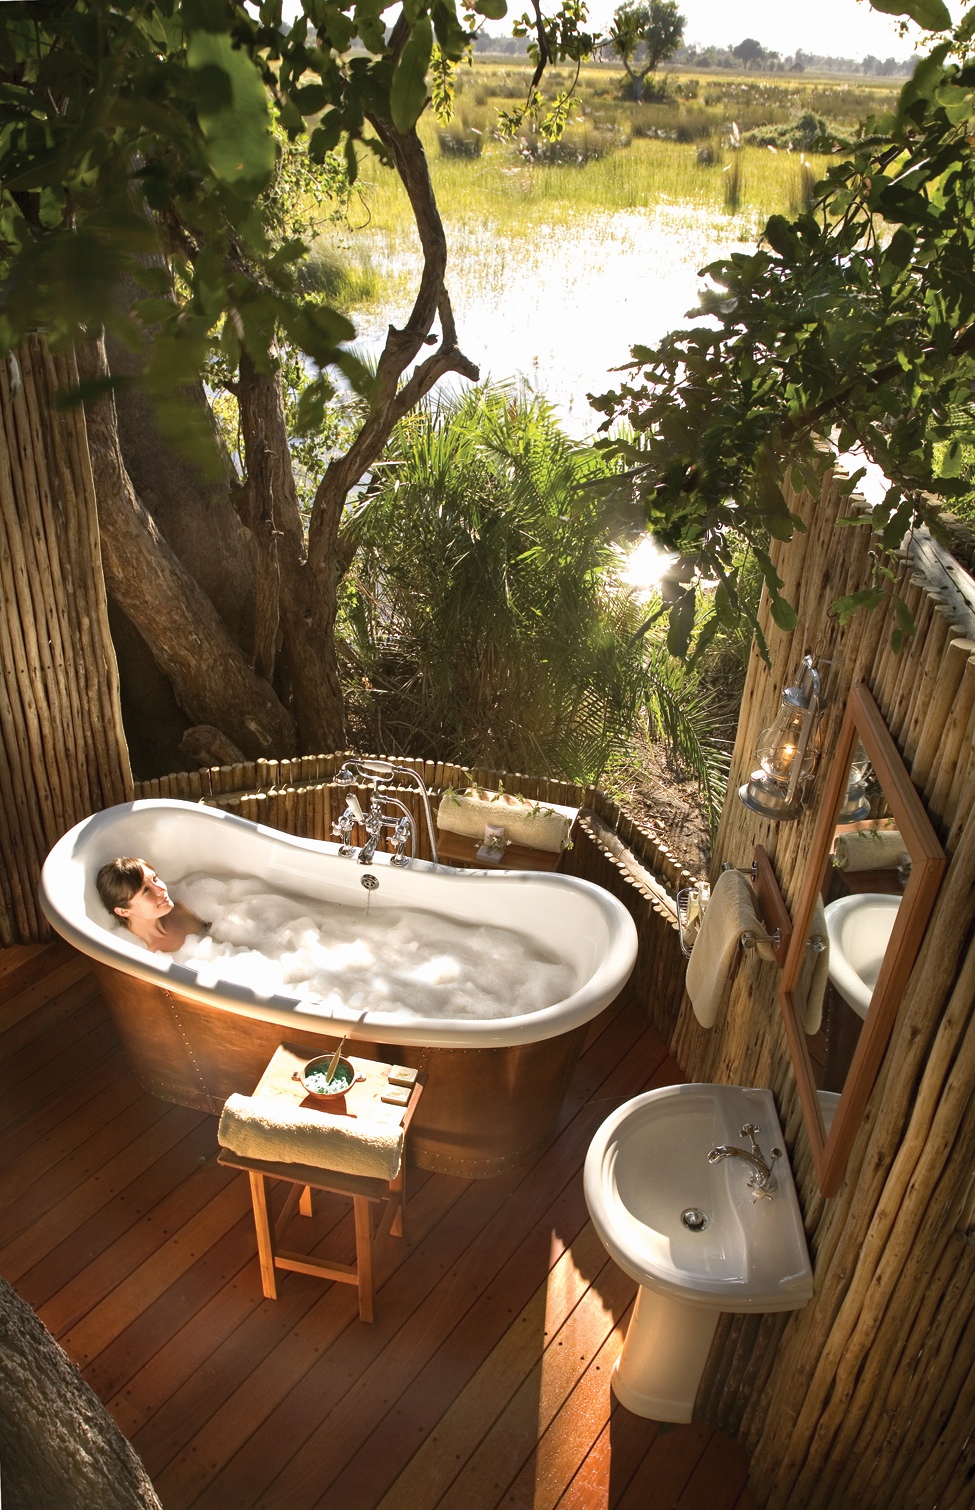 Traditional bathroom design with nature "width =" 975 "height =" 1510 "srcset =" https://mileray.com/wp-content/uploads/2020/05/1588515049_4_Gorgeous-Bathrooms-That-Connect-To-Nature-In-Your-Bedroom.jpg 975w, https: / /mileray.com/wp-content/uploads/2016/02/Rustic-bath-in-wetland-194x300.jpg 194w, https://mileray.com/wp-content/uploads/2016/02/Rustic-bath - in-wetland-768x1189.jpg 768w, https://mileray.com/wp-content/uploads/2016/02/Rustic-bath-in-wetland-661x1024.jpg 661w, https://mileray.com/wp - content / uploads / 2016/02 / Rustic bath in the wetland-696x1078.jpg 696w, https://mileray.com/wp-content/uploads/2016/02/Rustic-bath-in-wetland-271x420. jpg 271w "sizes =" (maximum width: 975px) 100vw, 975px